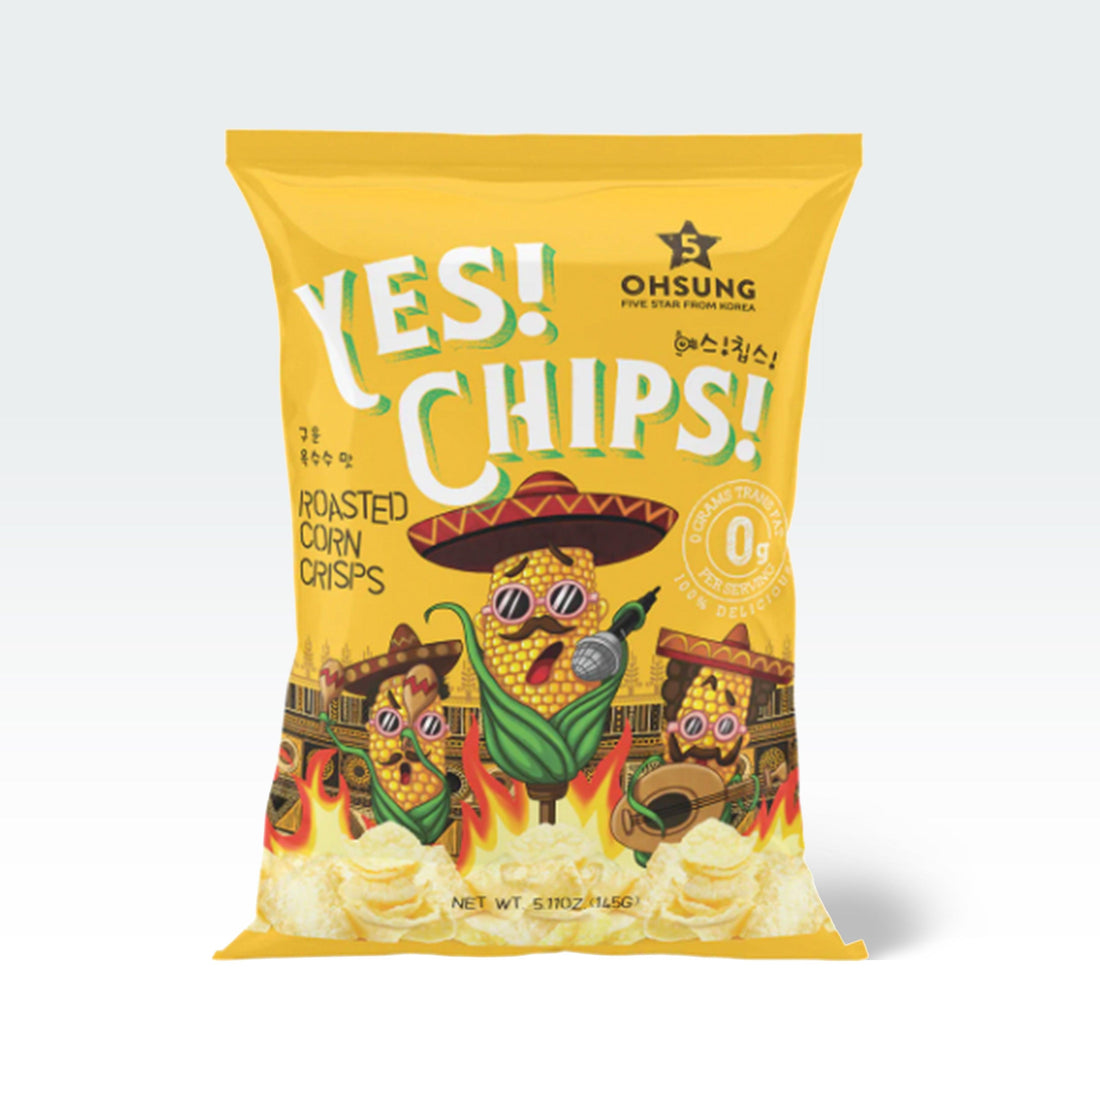 Ohsung Yes! Chips! Roasted Corn Crisps 5.11oz(145g) - Anytime Basket